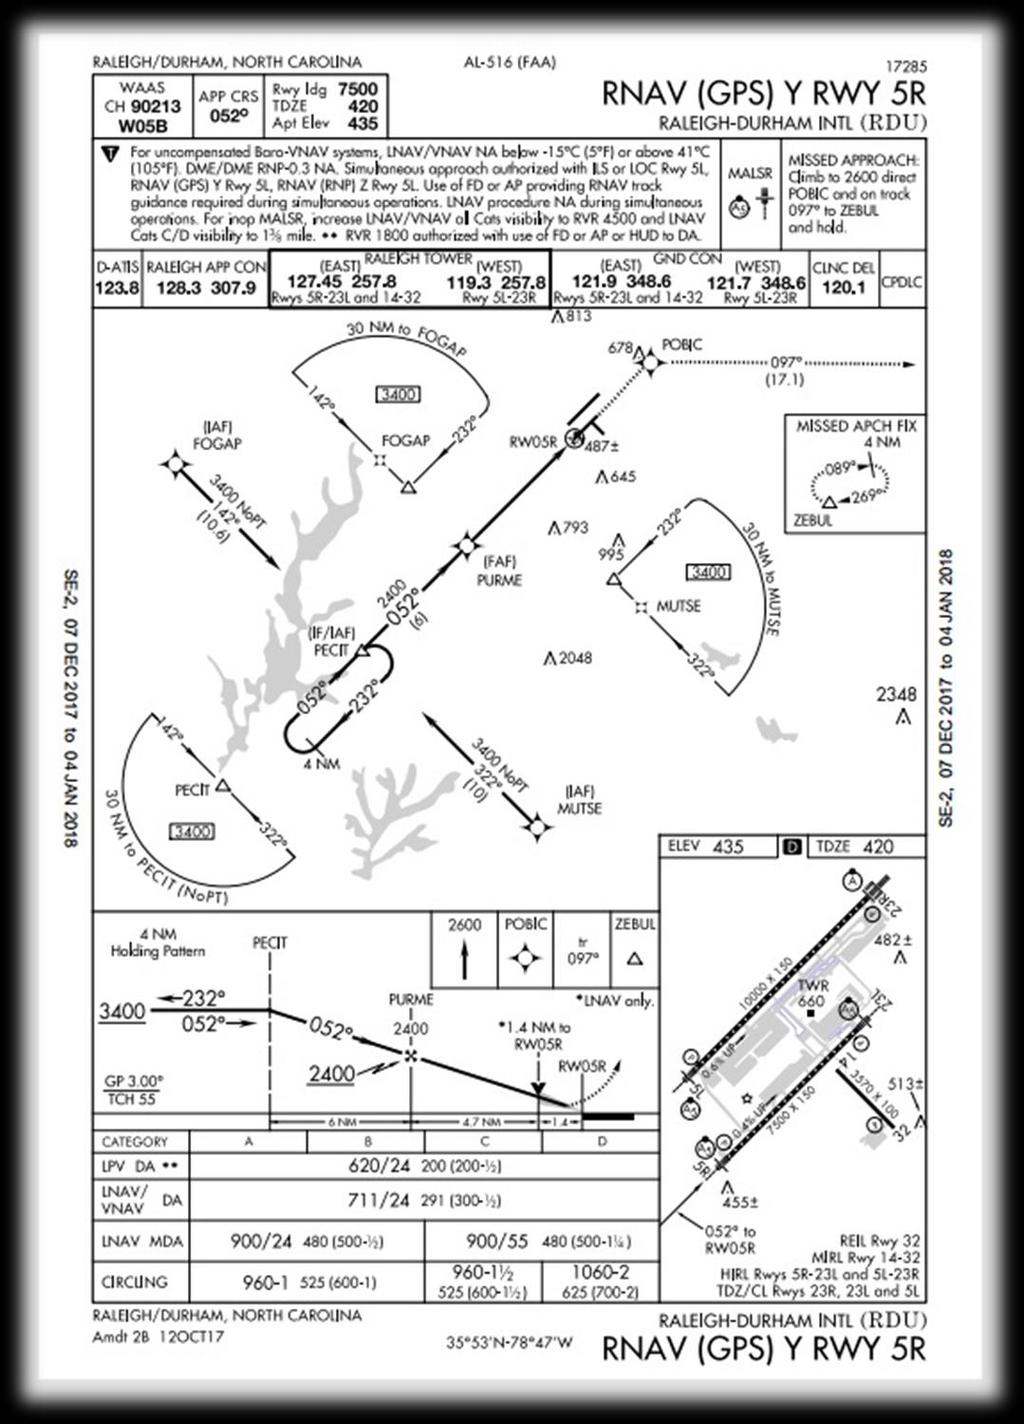 RNAV (GPS) Y RWY 5R APPROACH [@ 33:55 in video] The approach demonstrated in this tutorial is the RNAV